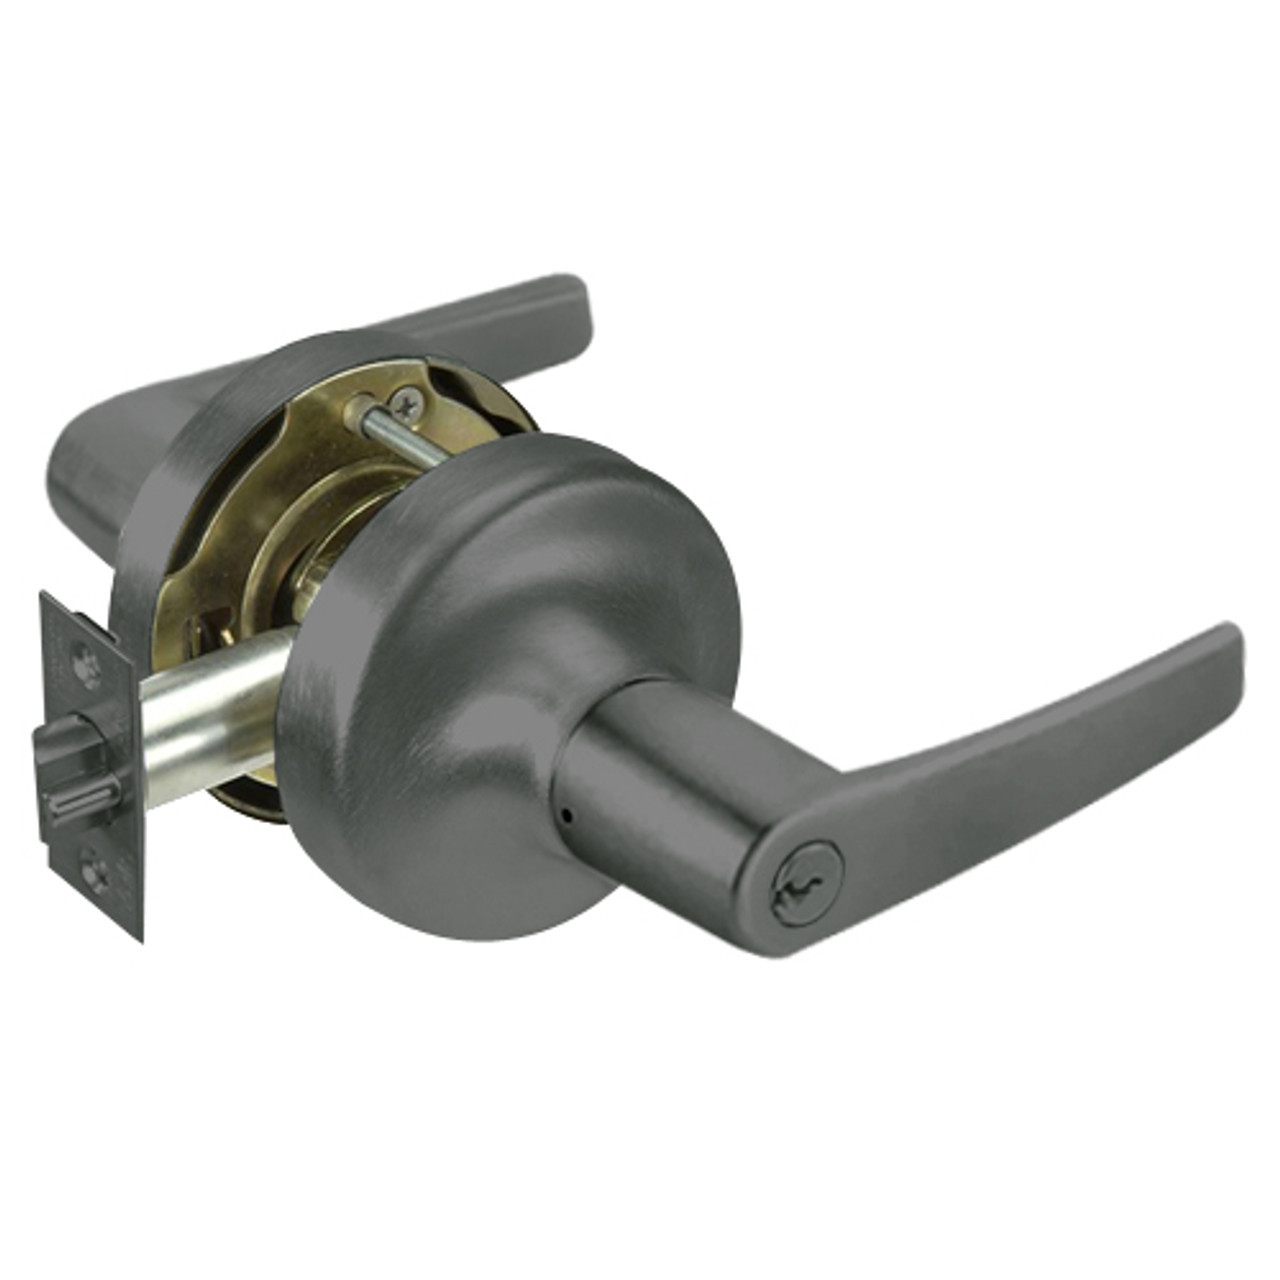 MO5304LN-620 Yale 5300LN Series Single Cylinder Entry Cylindrical Lock with Monroe Lever in Antique Nickel